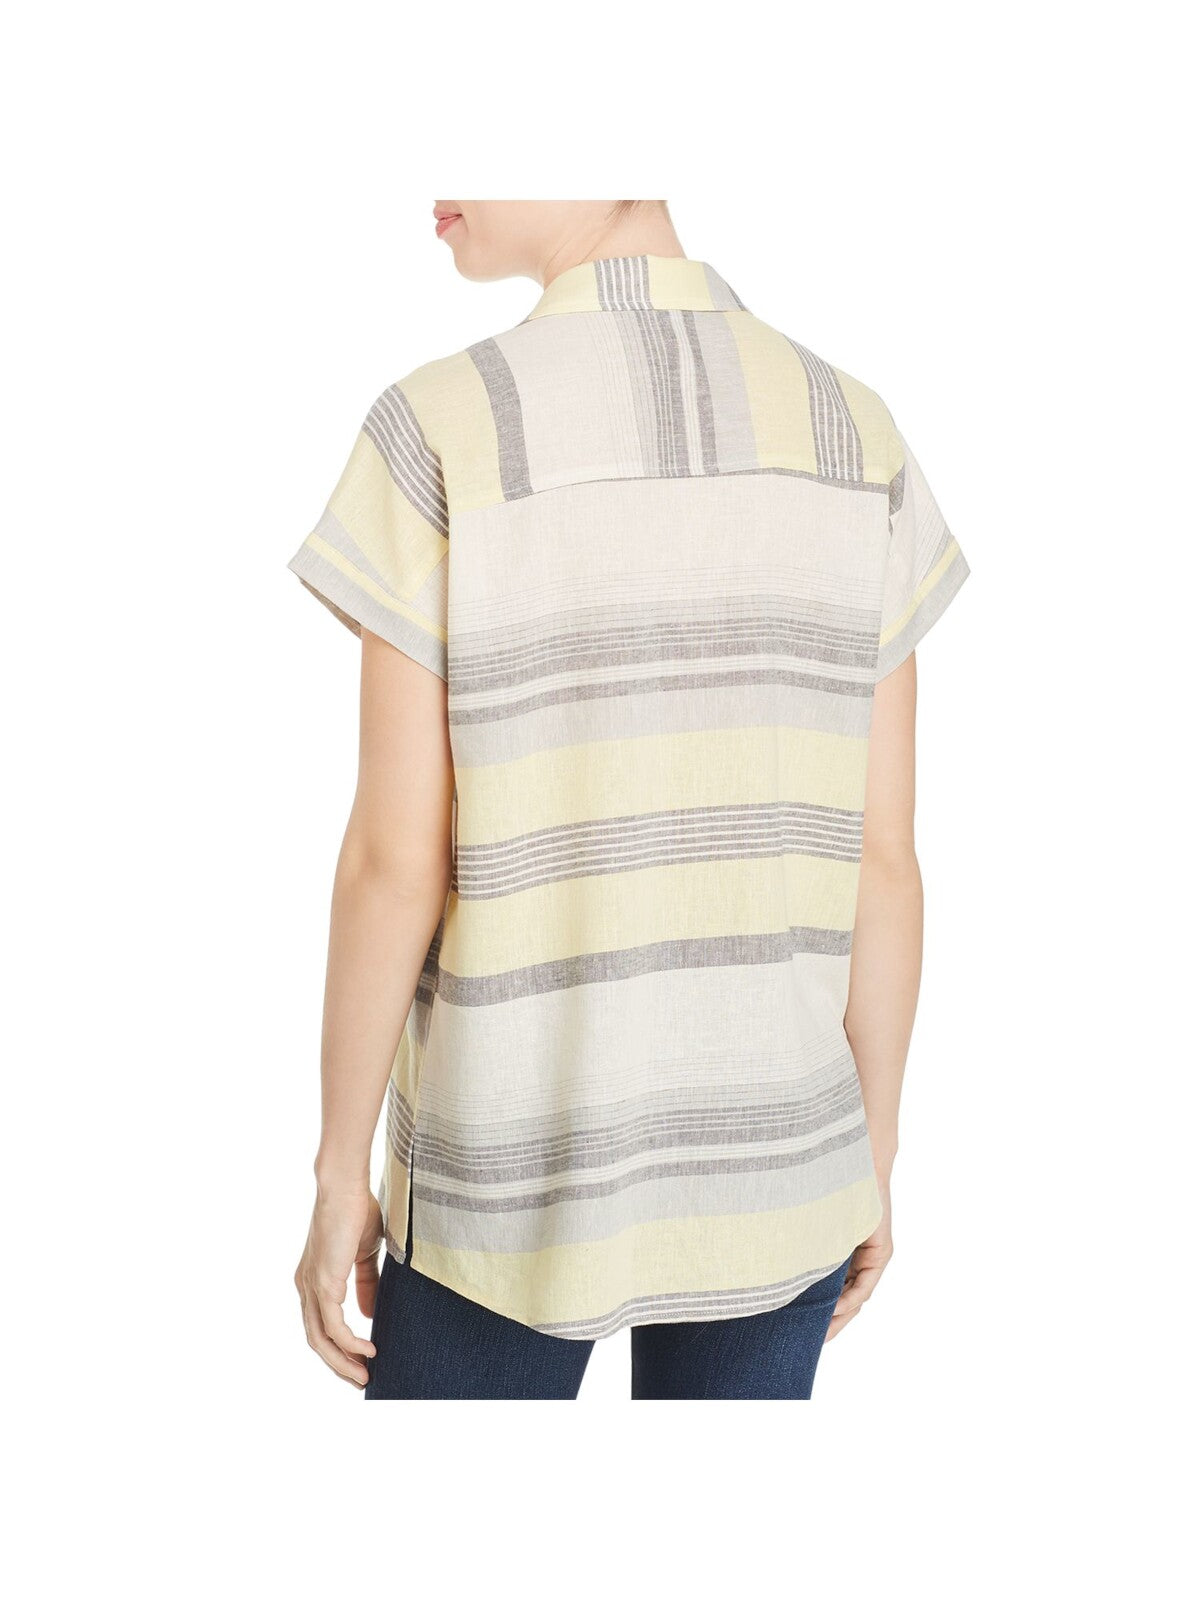 MARLED REUNITED CLOTHING Womens Yellow Striped Short Sleeve Collared Button Up Top S